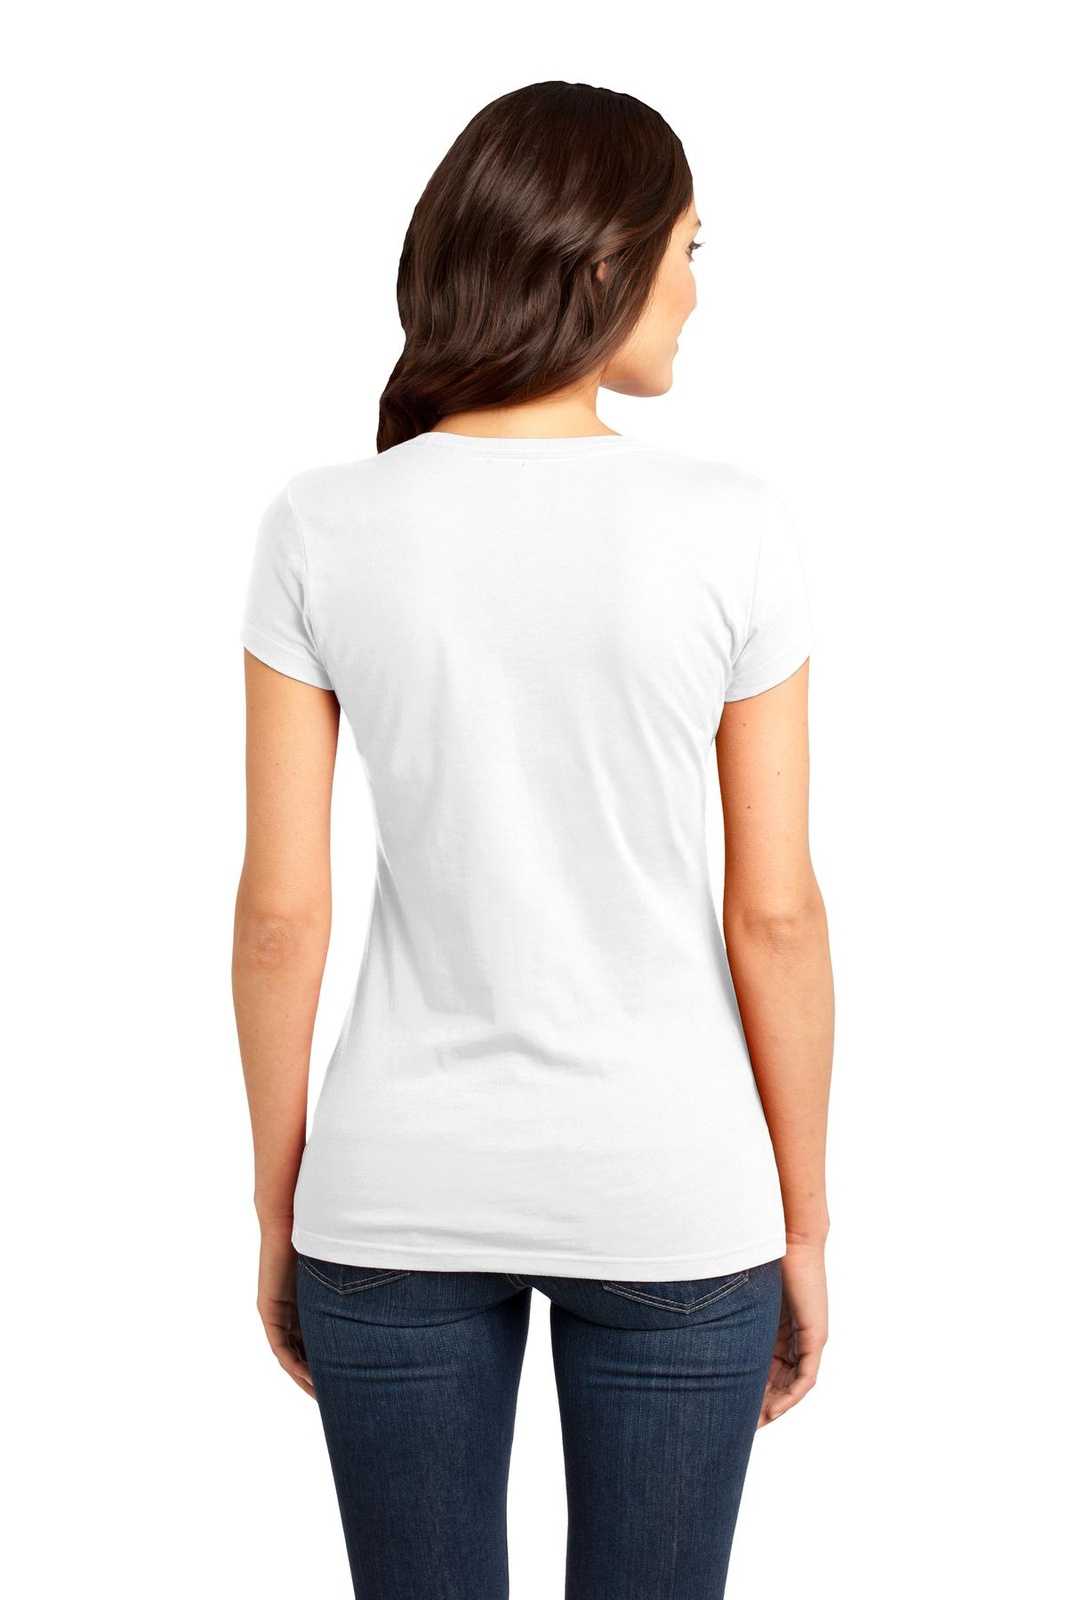 District DT6001 Women's Fitted Very Important Tee - White - HIT a Double - 1